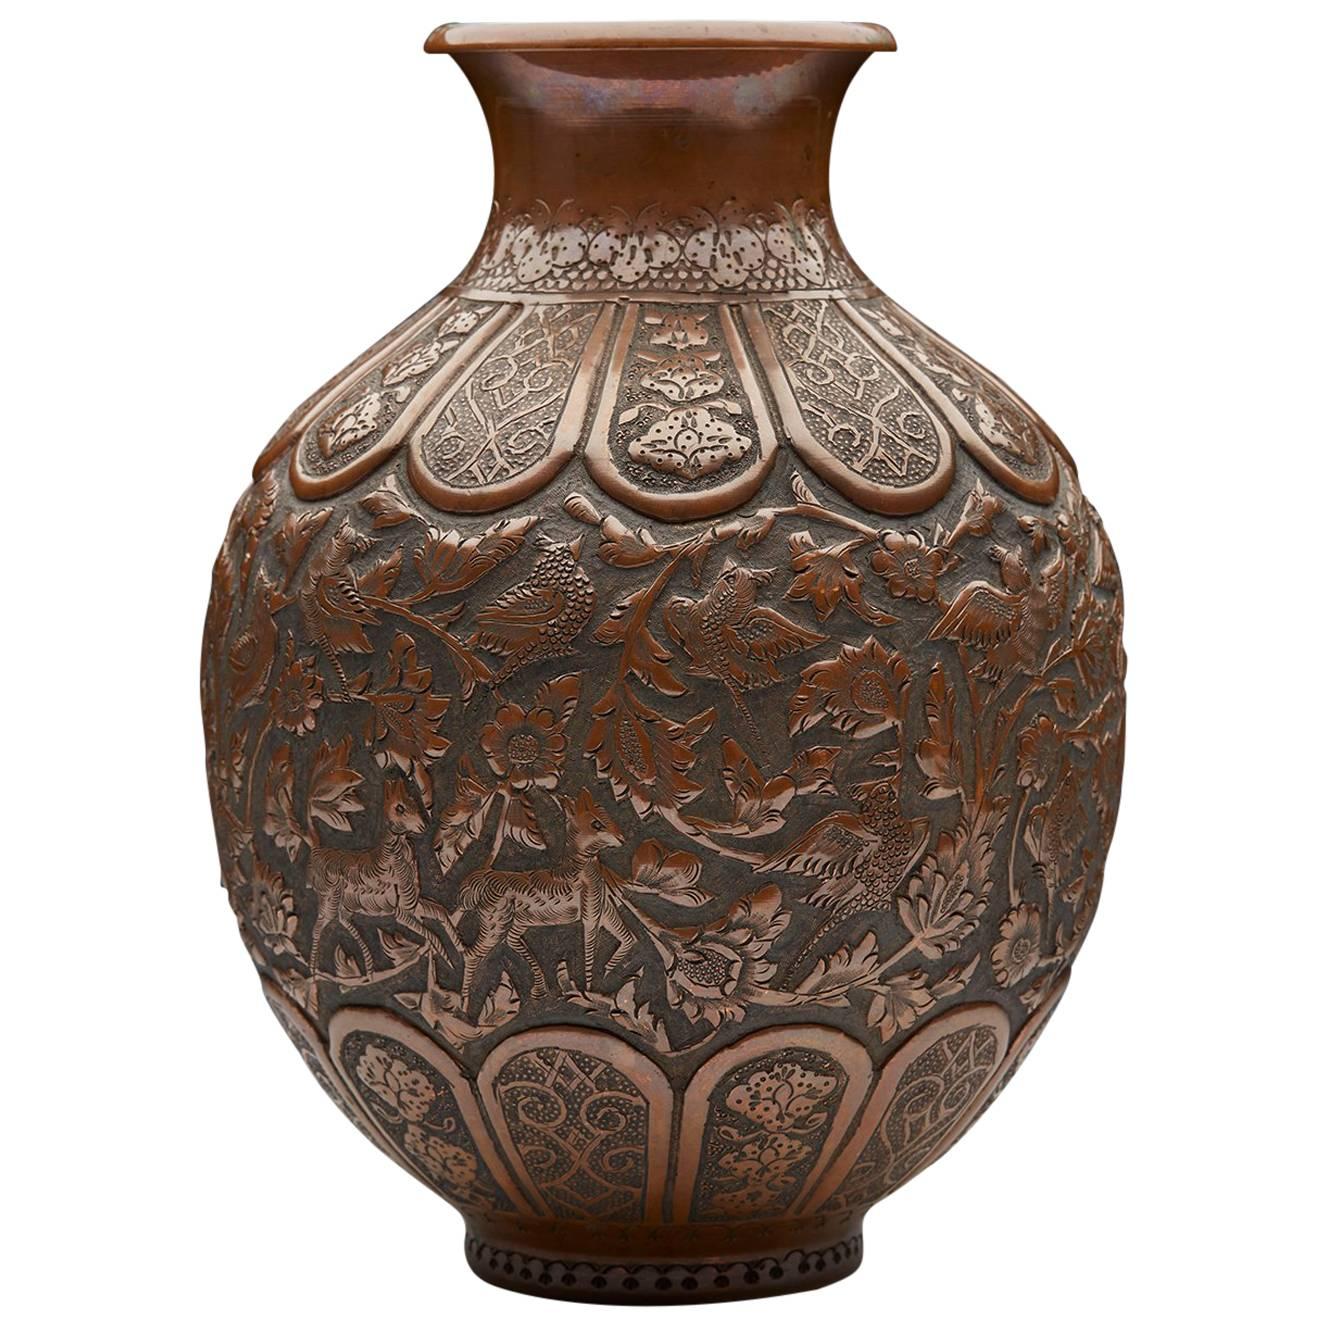 Antique Persian Copper Vase with Birds and Animals 19th Century